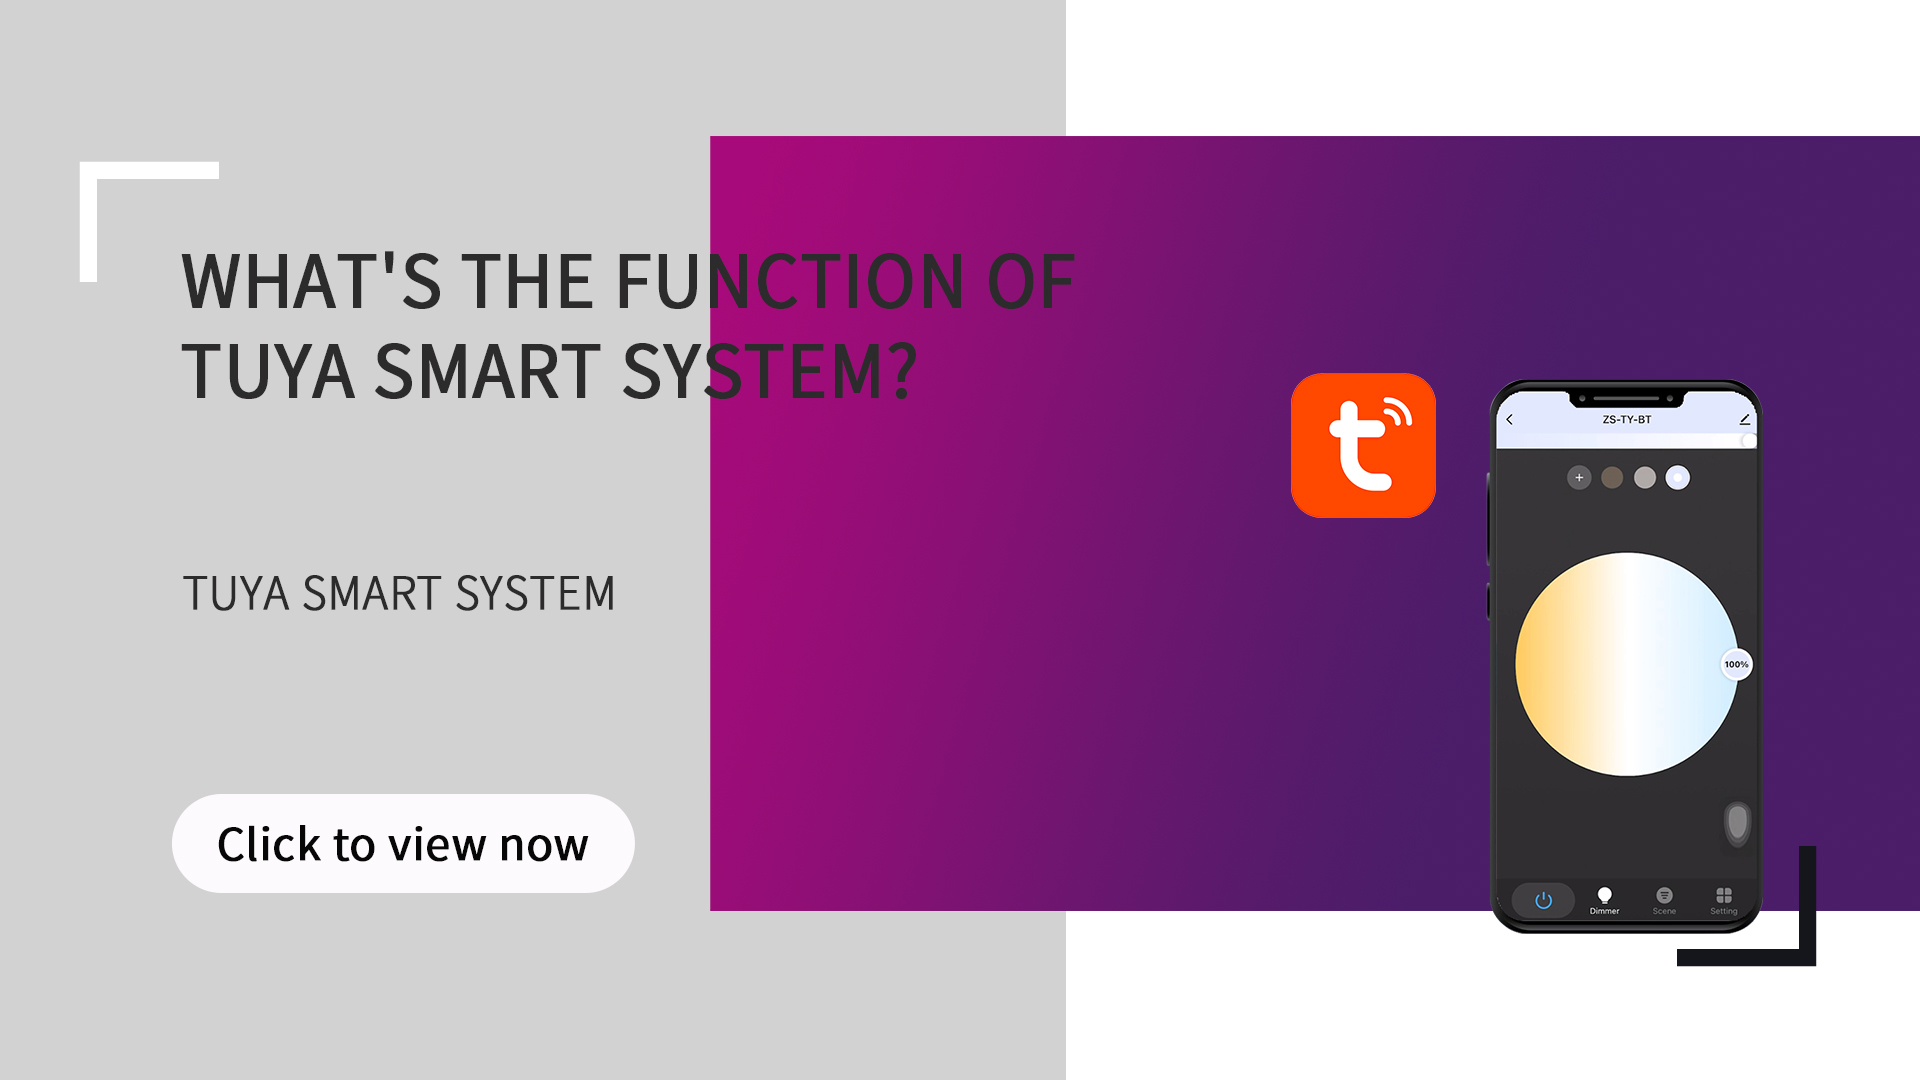 What's the function of tuya smart system?